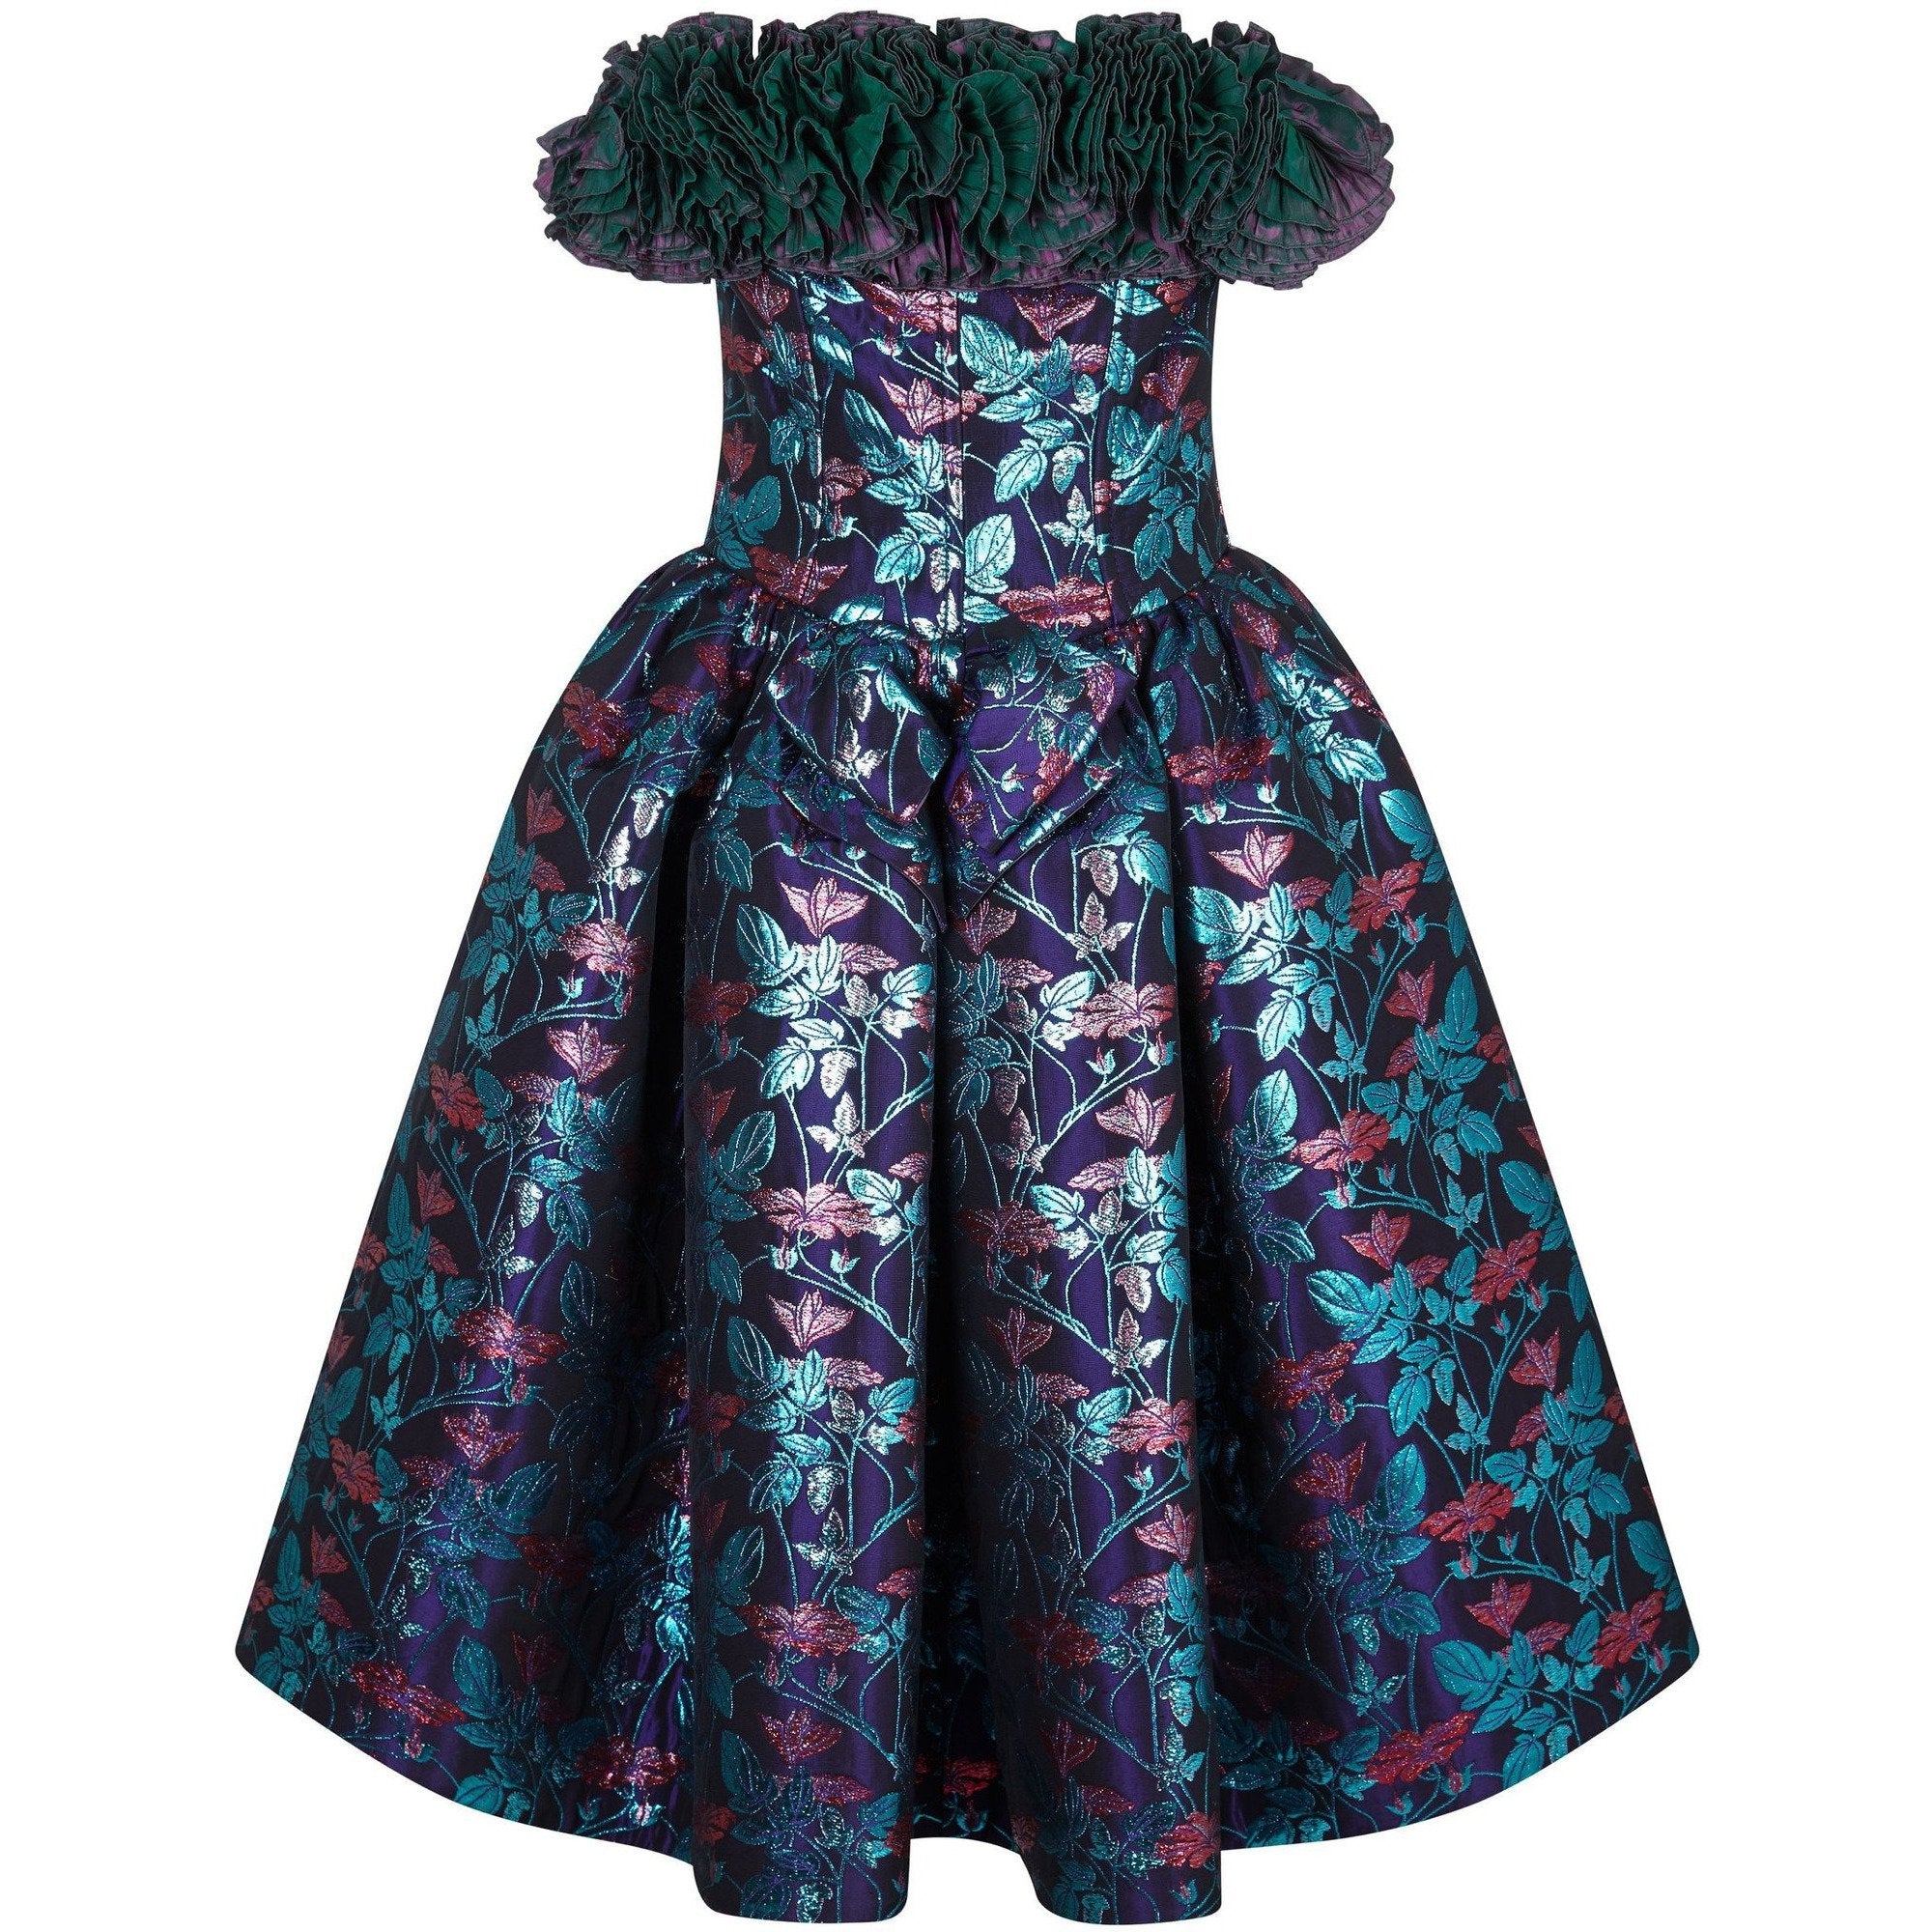 Nina Ricci 1990s Haute Couture Puff Skirt Party Dress with Ruffle Neckline